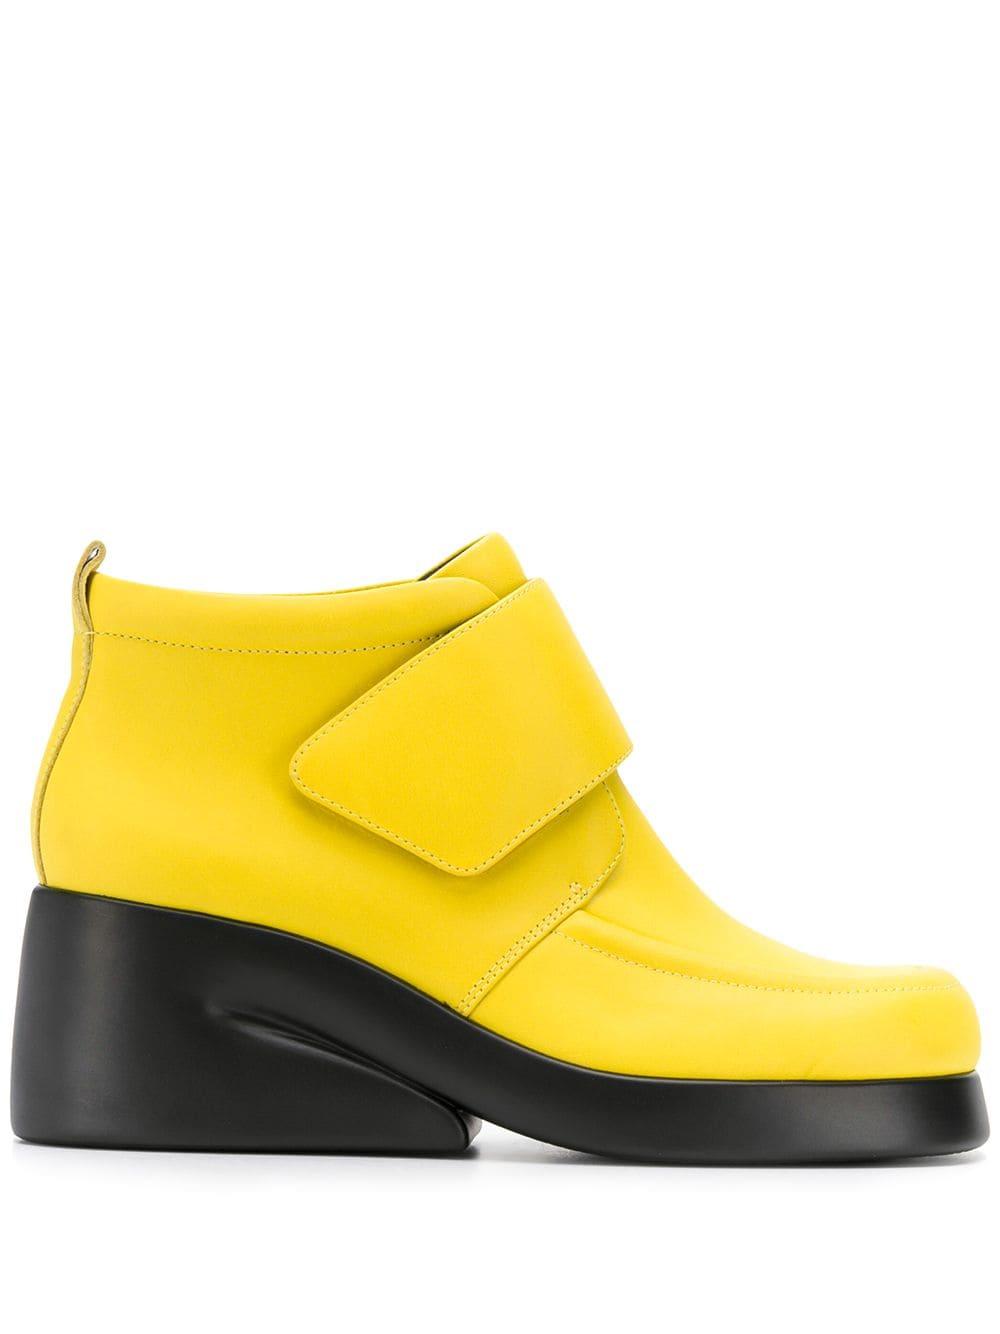 Camper Kaah Boots in Yellow | Lyst Canada